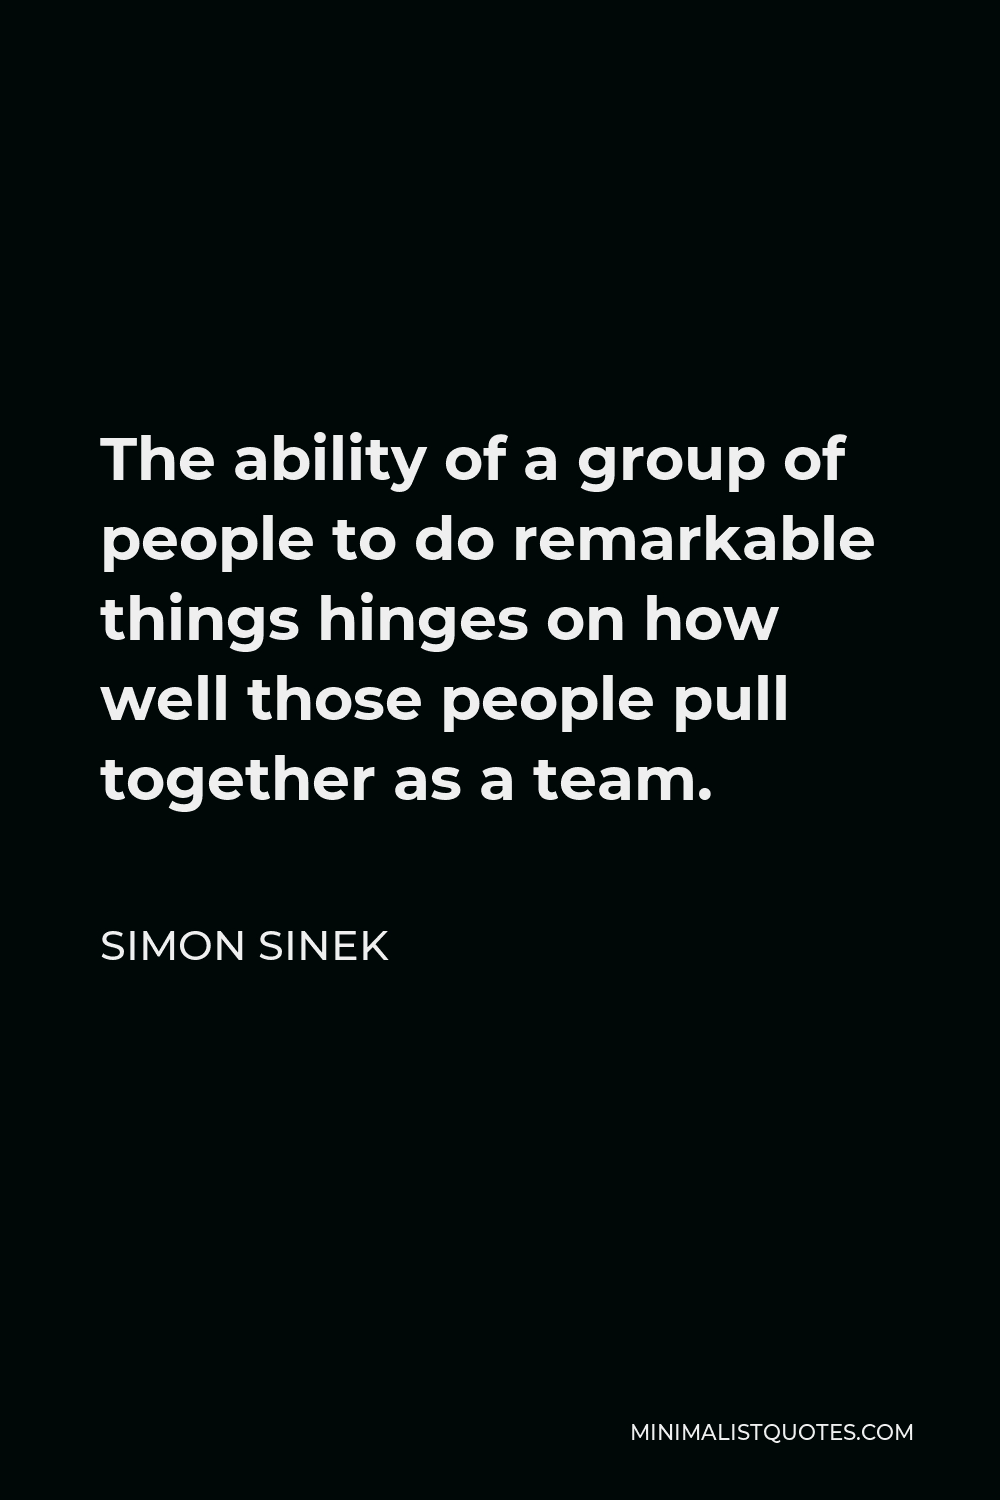 Simon Sinek Quote - The ability of a group of people to do remarkable things hinges on how well those people pull together as a team.